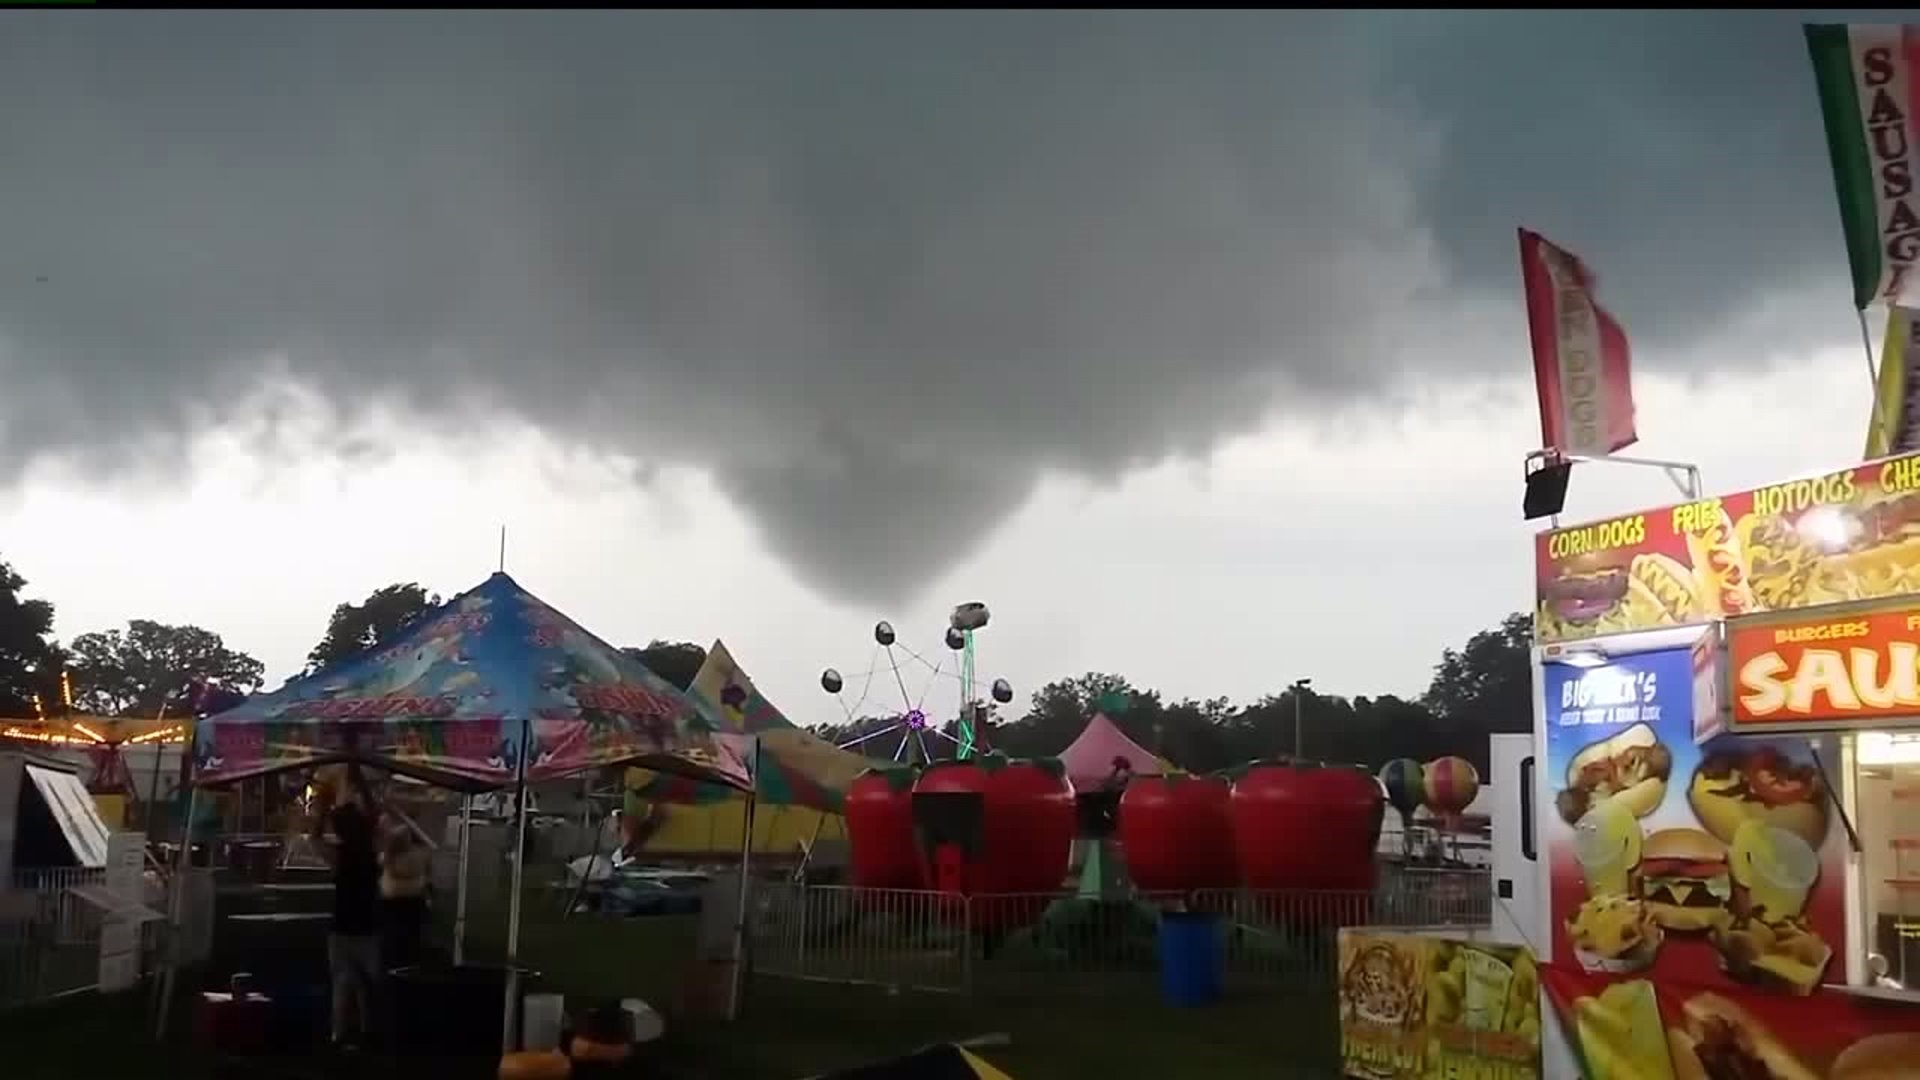 Weathering the storm at the Fair